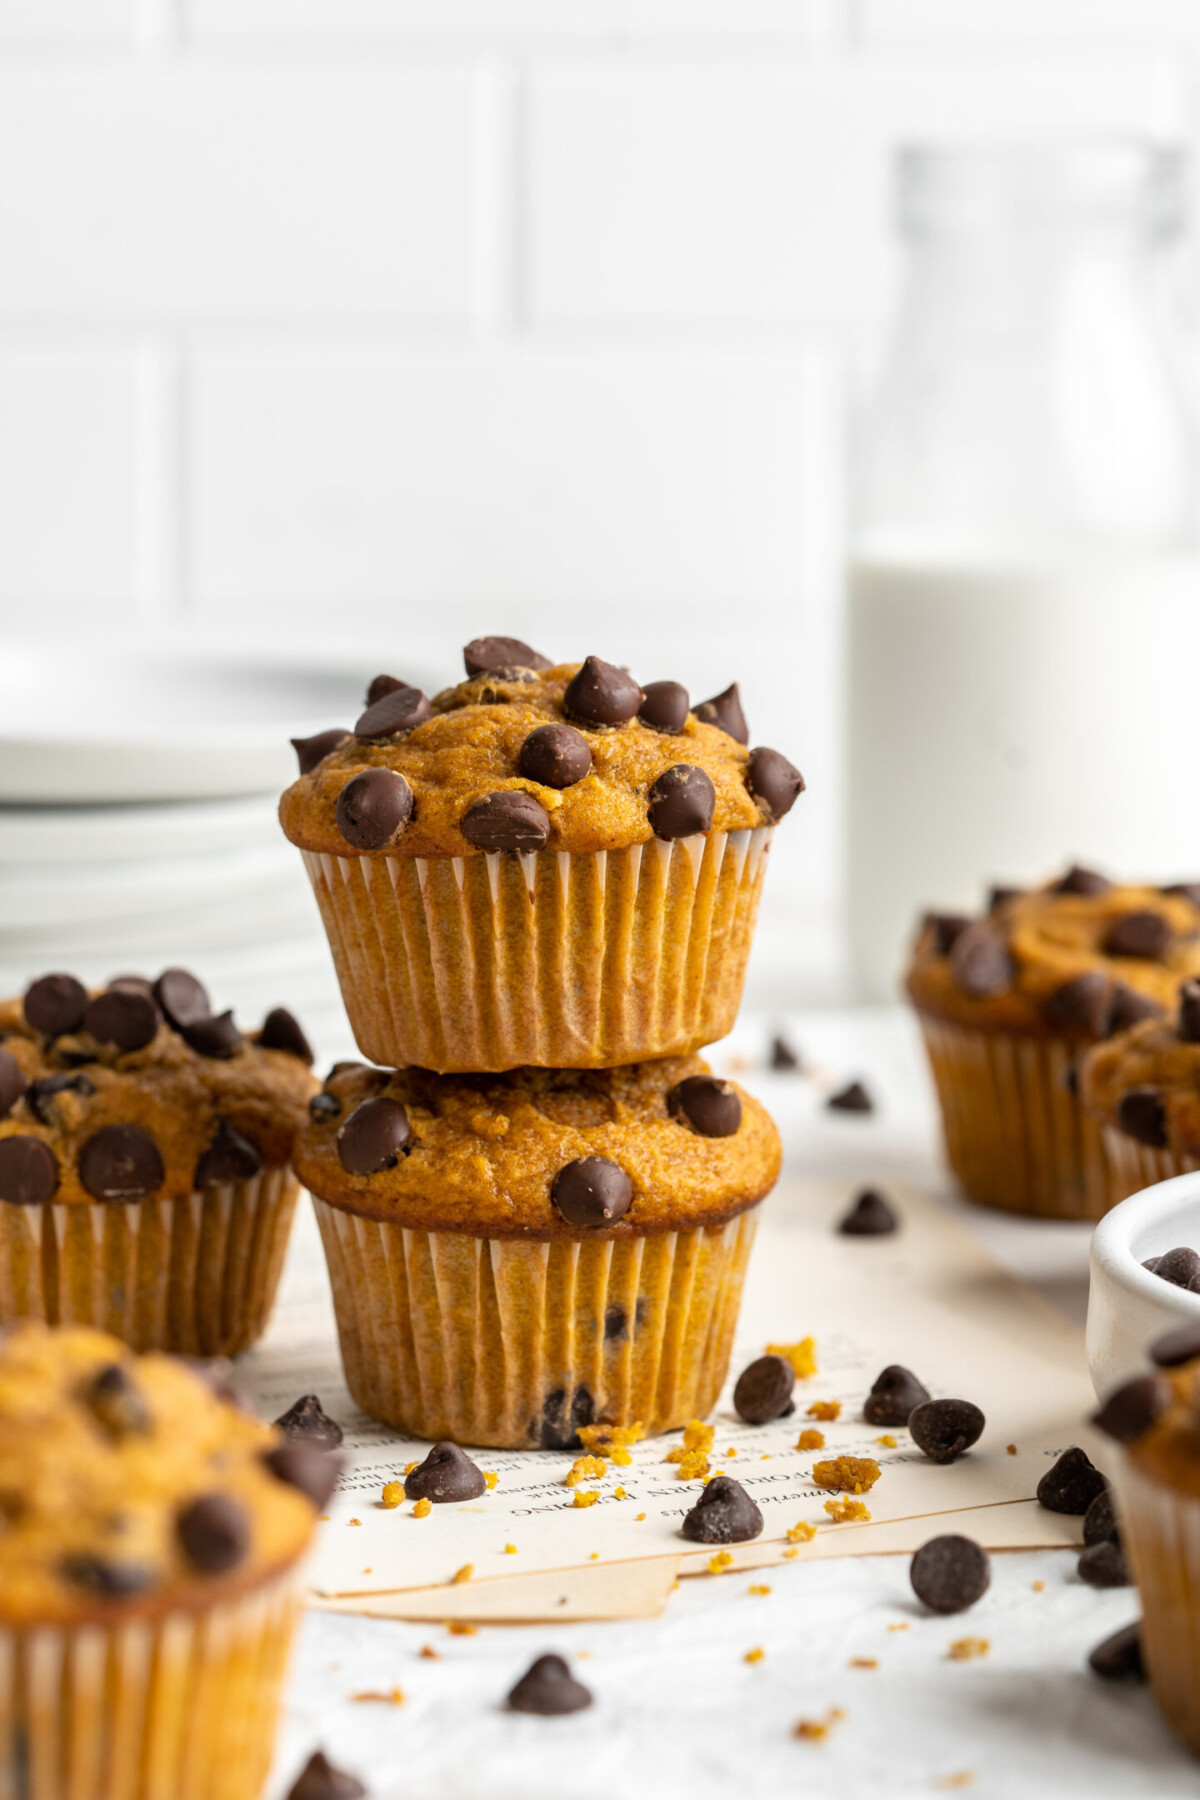 Two chocolate chip pumpkin muffins stacked on top of each other, surrounded by chocolate chips, with a glass of milk in the background.